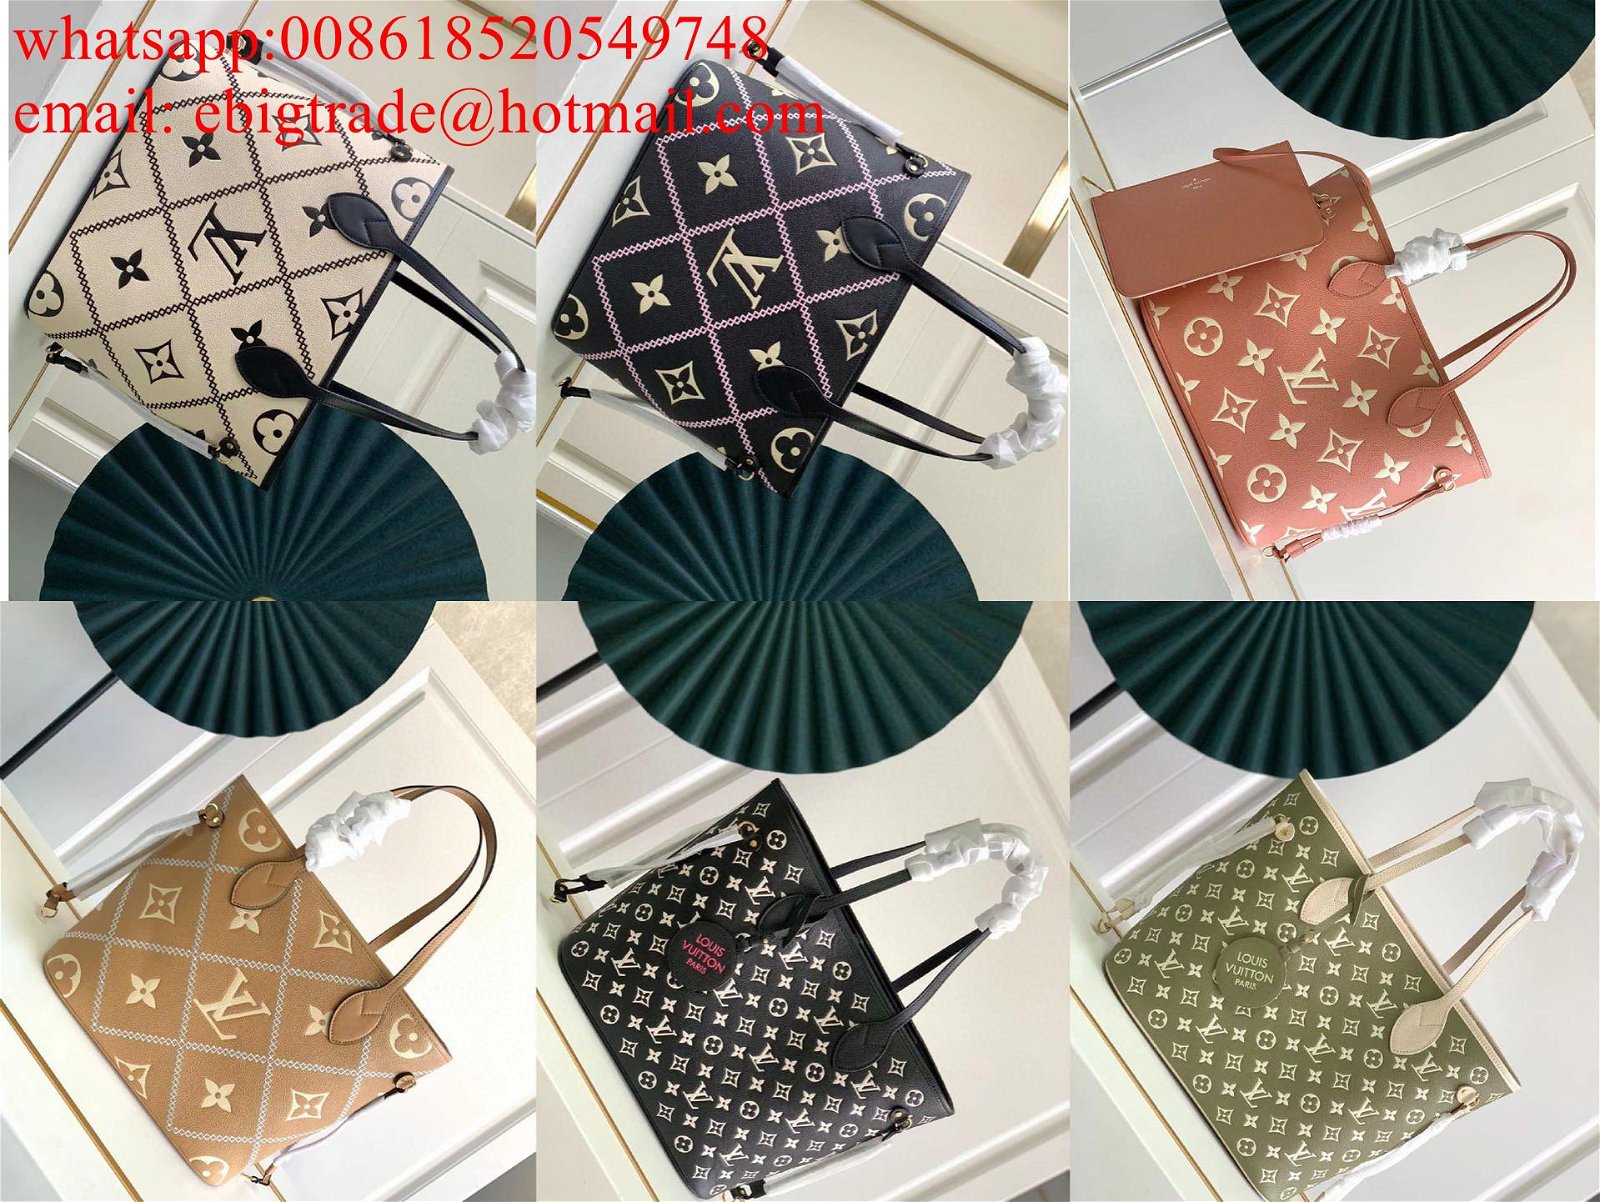 Wholesale               handbags on sale Cheap     andbags discount     ags  2